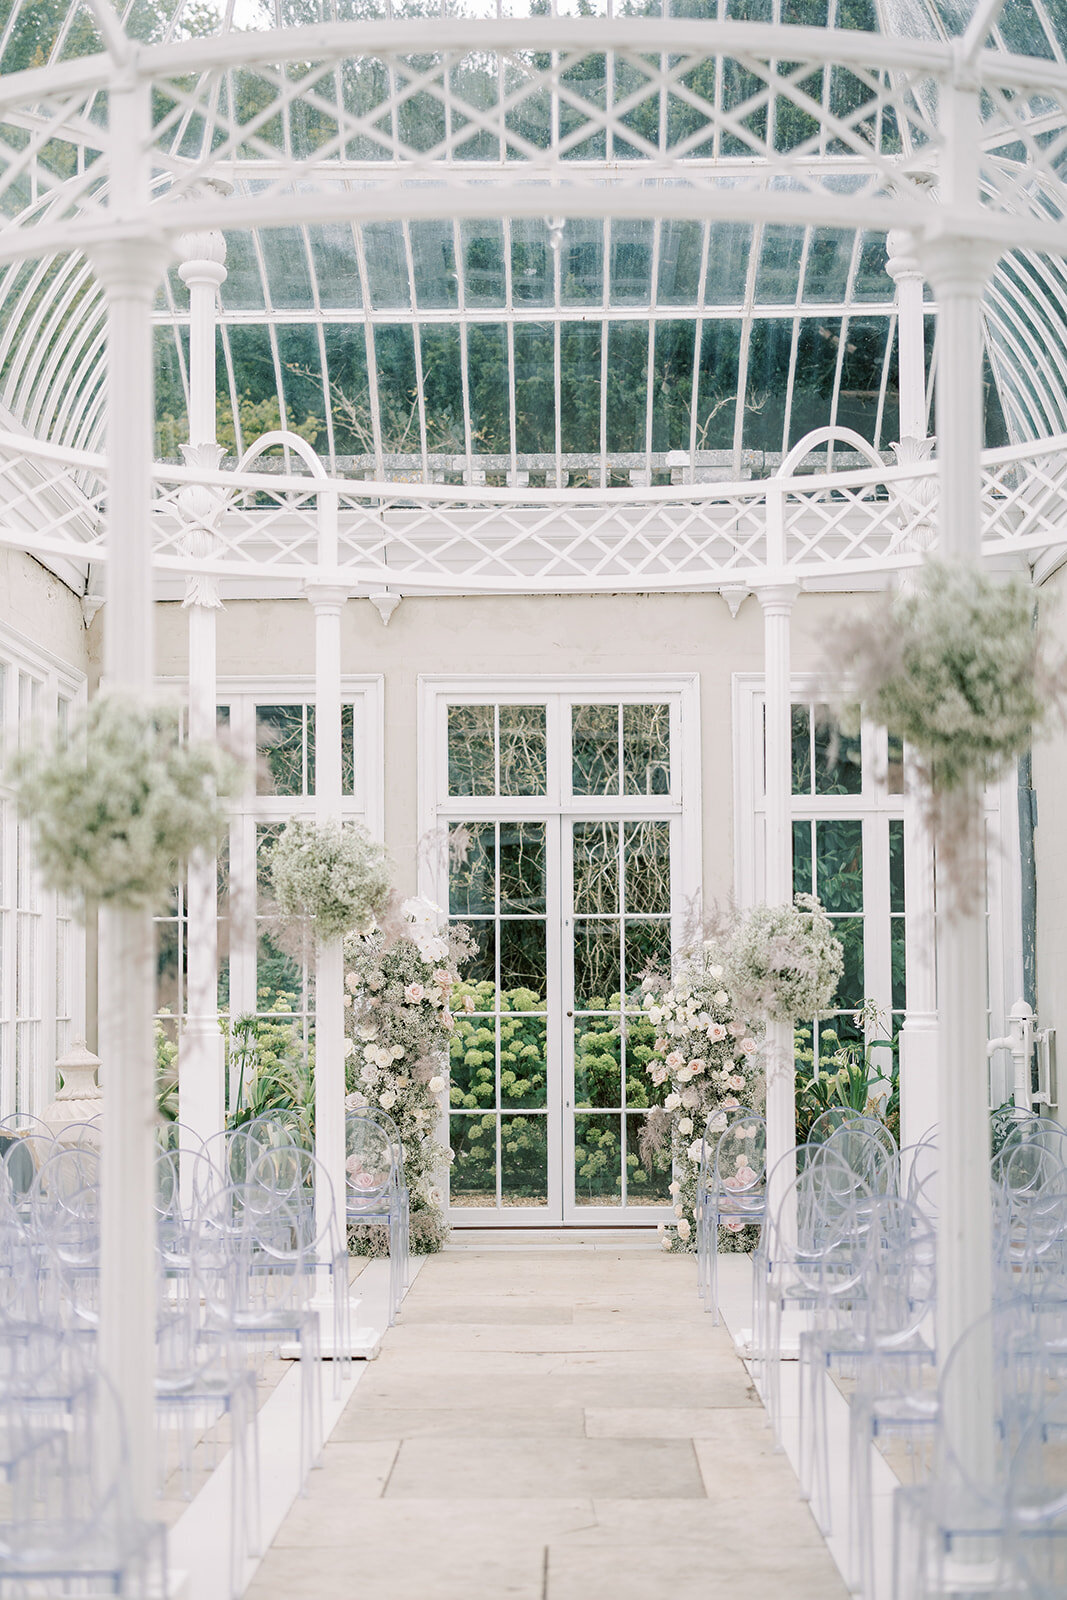 Interior of Domed Conservatory at came house wedding venue